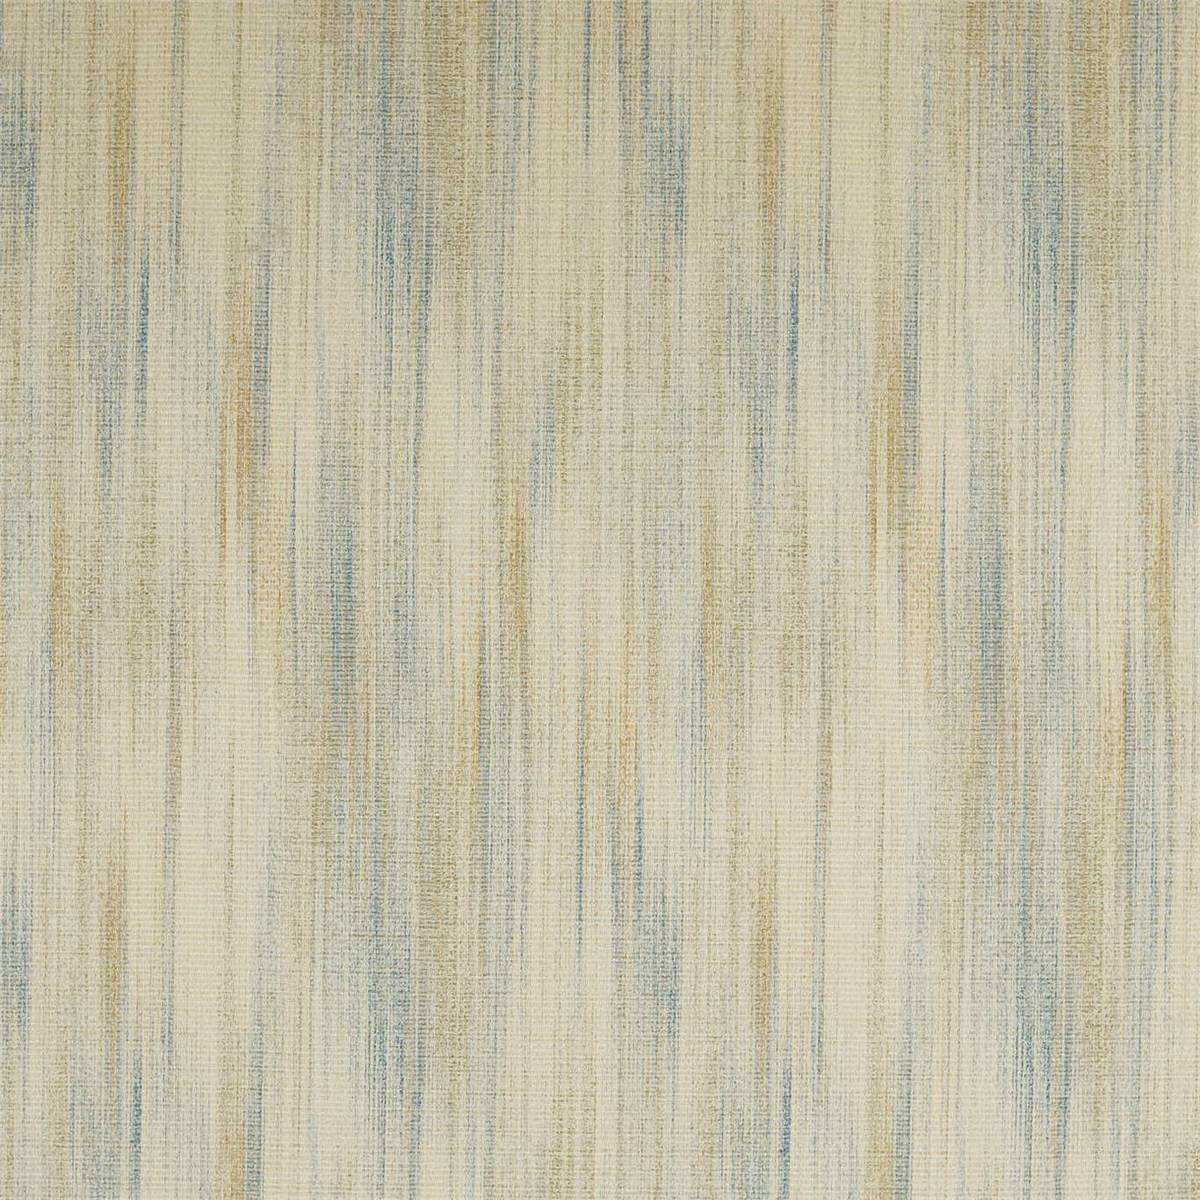 Prismatic Weave Fossil Fabric by Zoffany